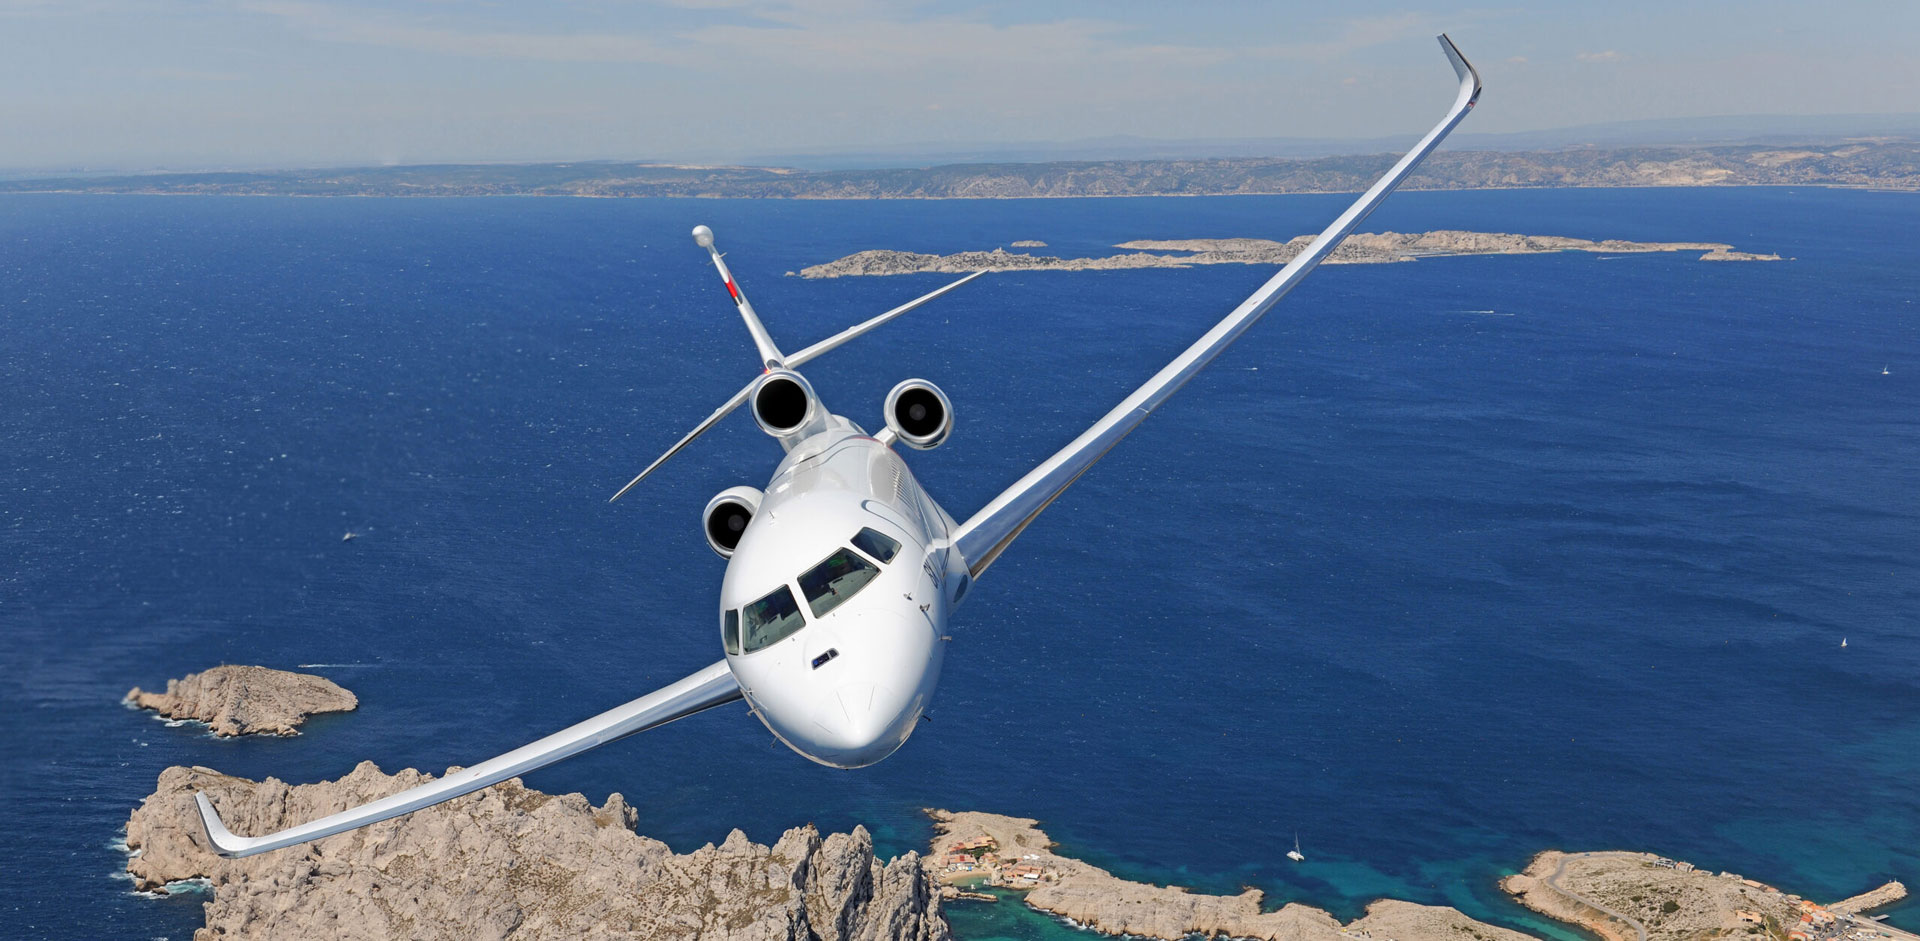 How To Buy A Private Jet - Fly to new heights with your own aircraft.